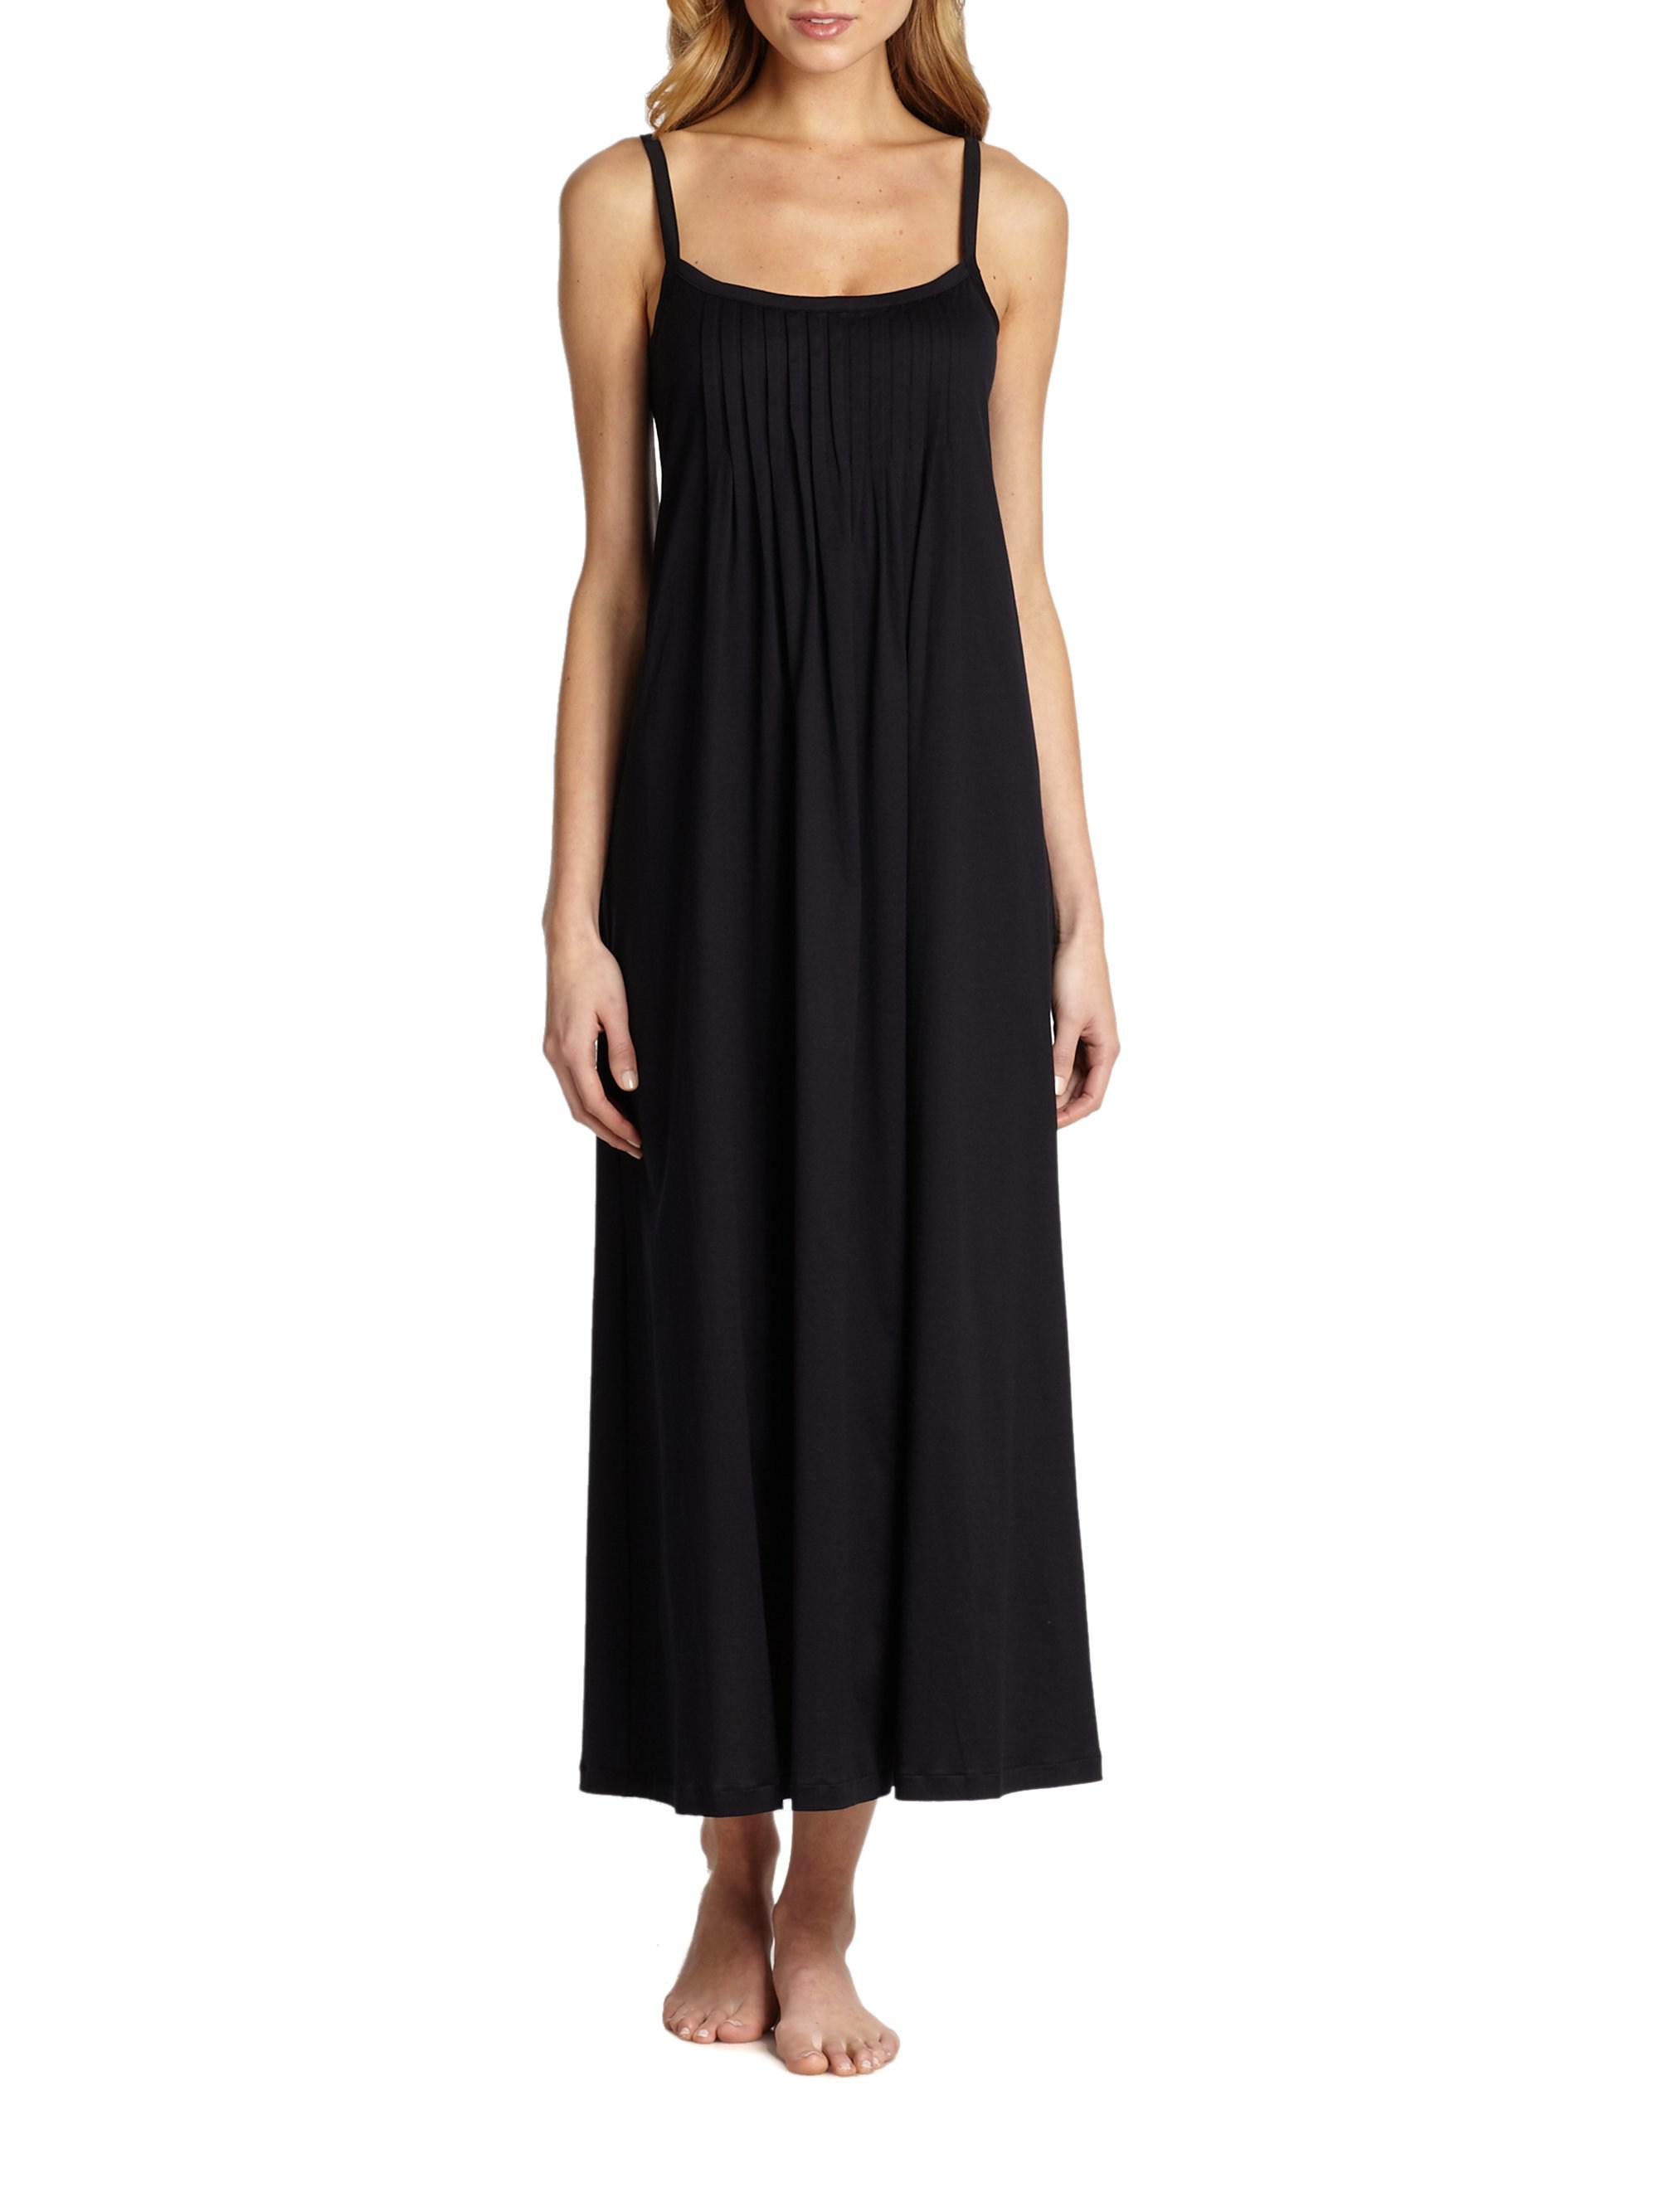 Hanro Cotton Juliet Long Chemise Gown in Black - Lyst